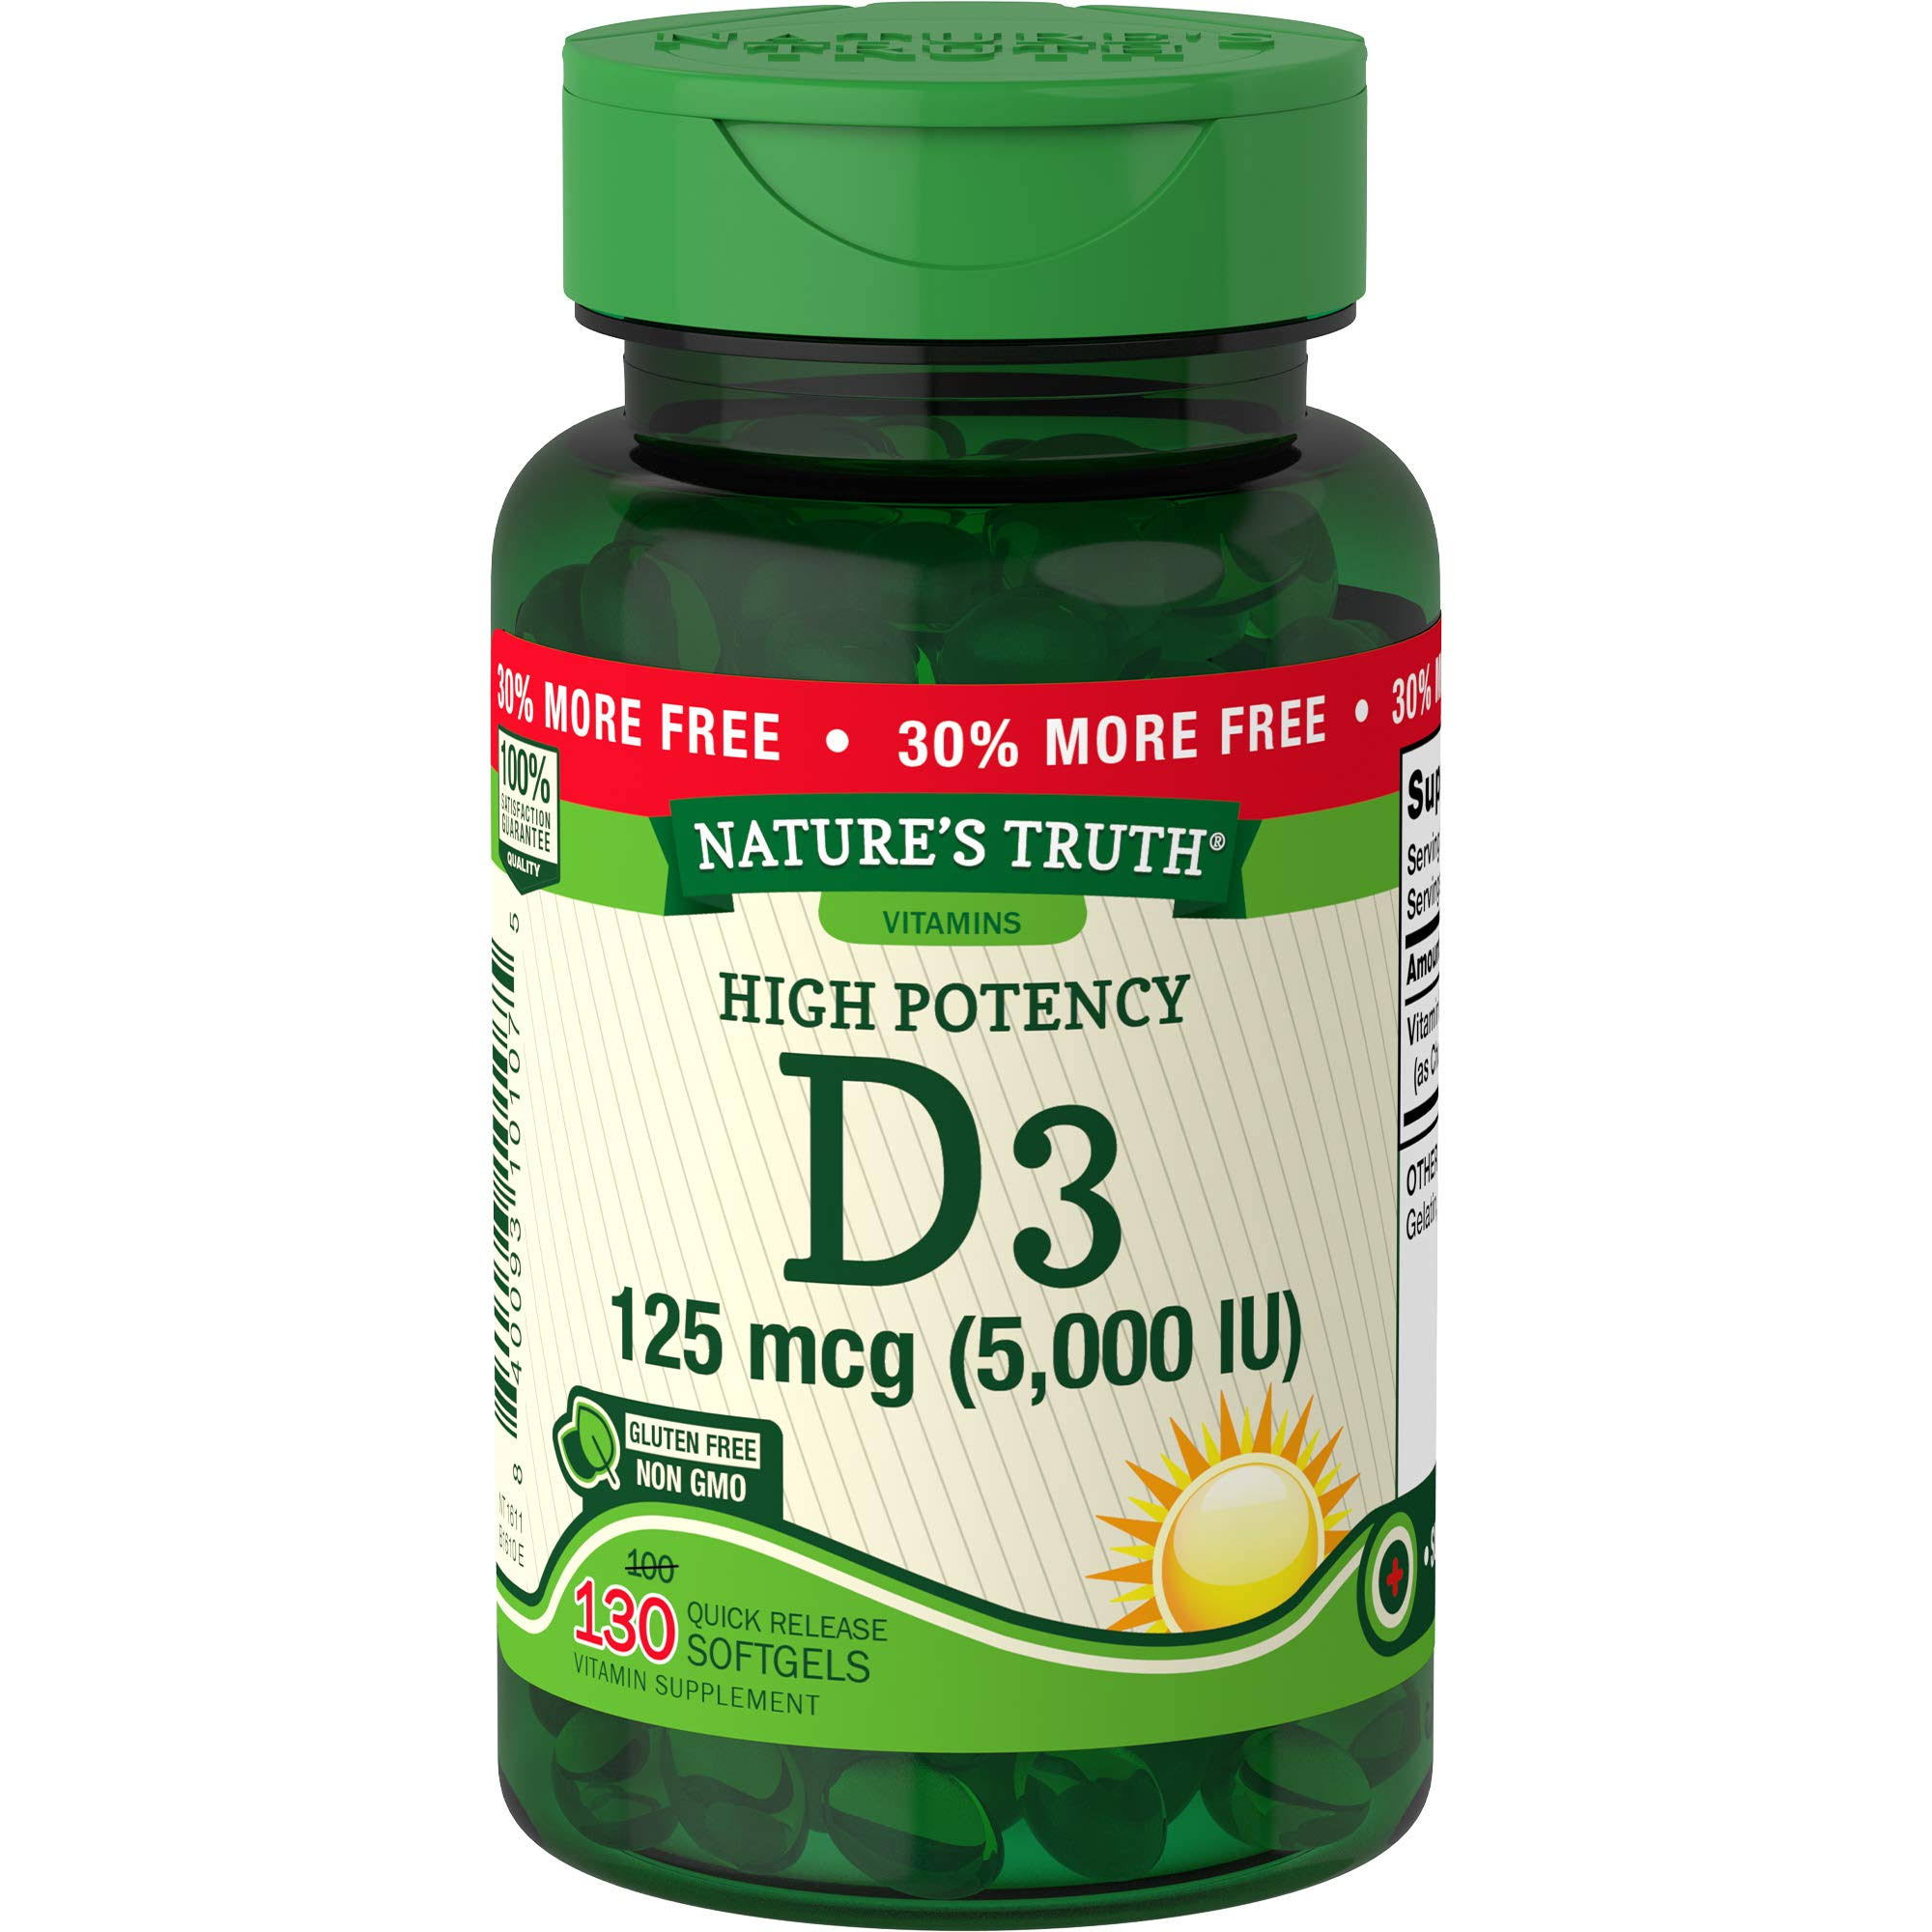 Nature's Truth High Potency Vitamin D3 Supplement - 5000 IU, 130ct